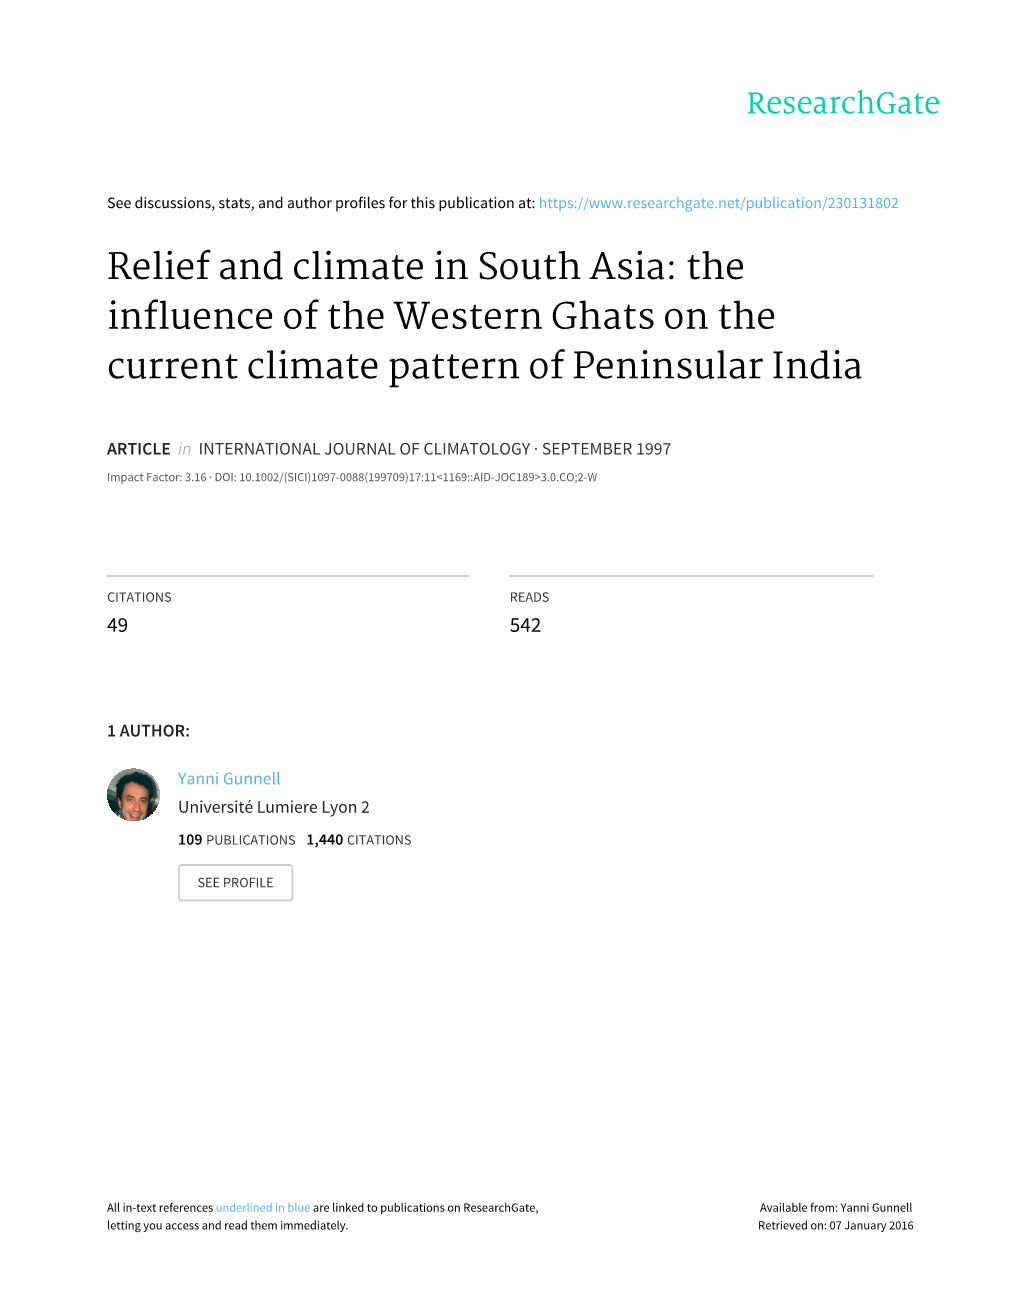 Relief and Climate in South Asia: the Influence of the Western Ghats on the Current Climate Pattern of Peninsular India